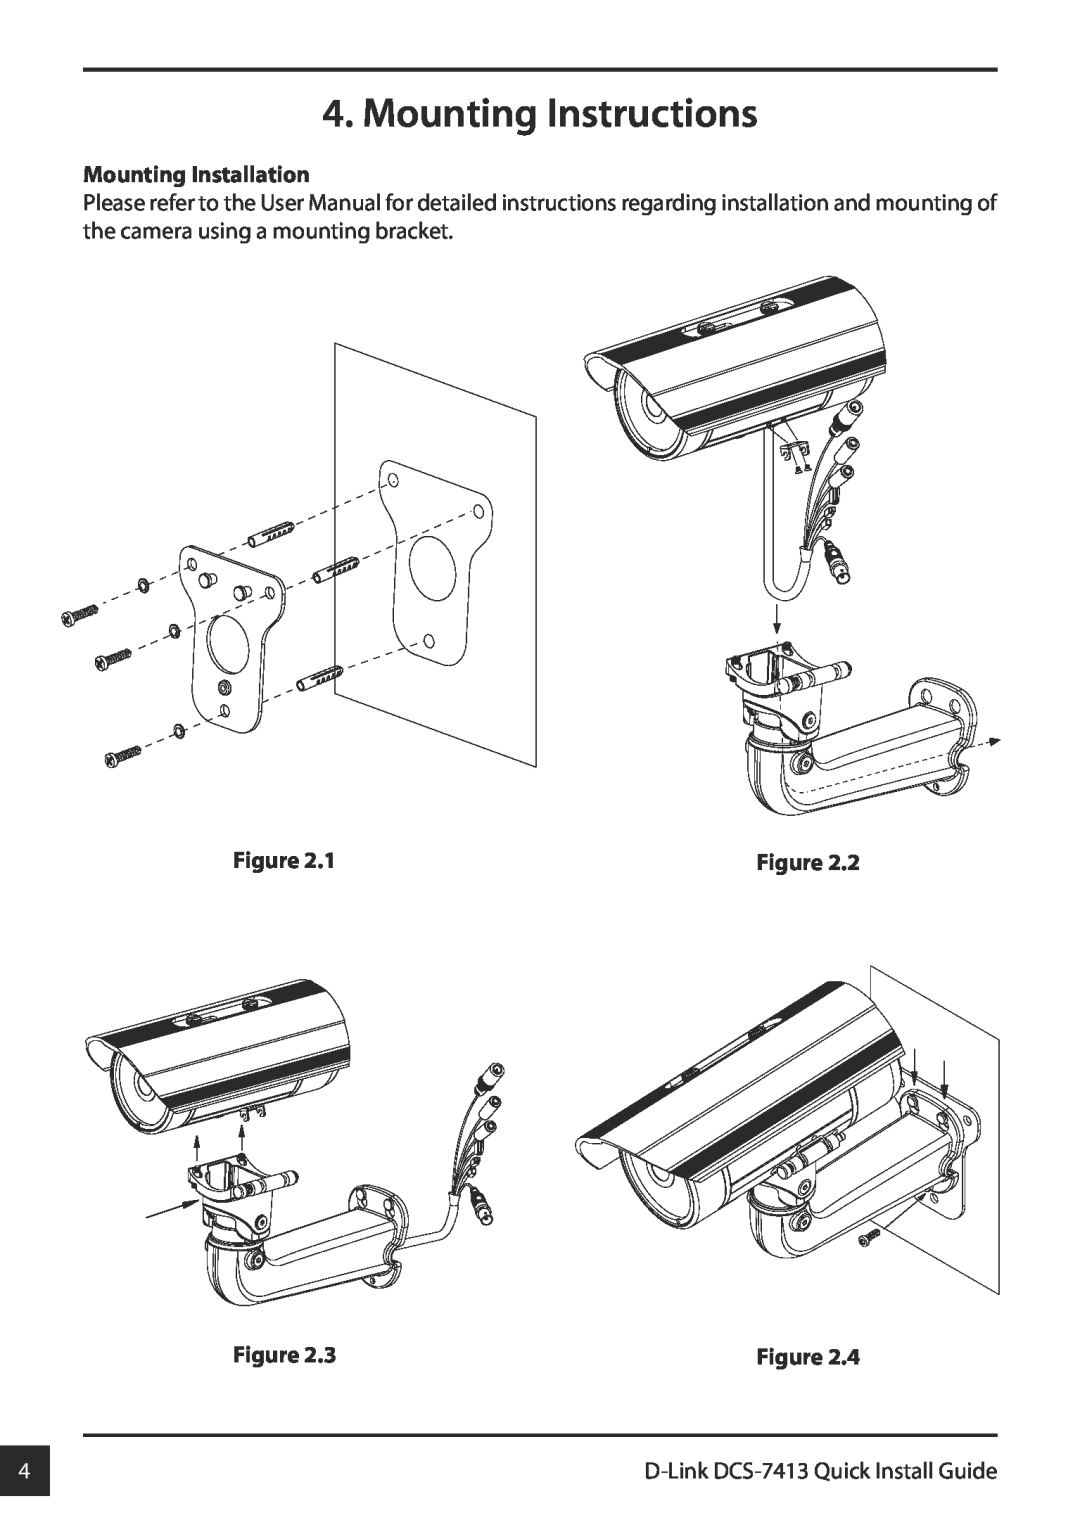 D-Link DCS-7413 manual Mounting Instructions, Mounting Installation 